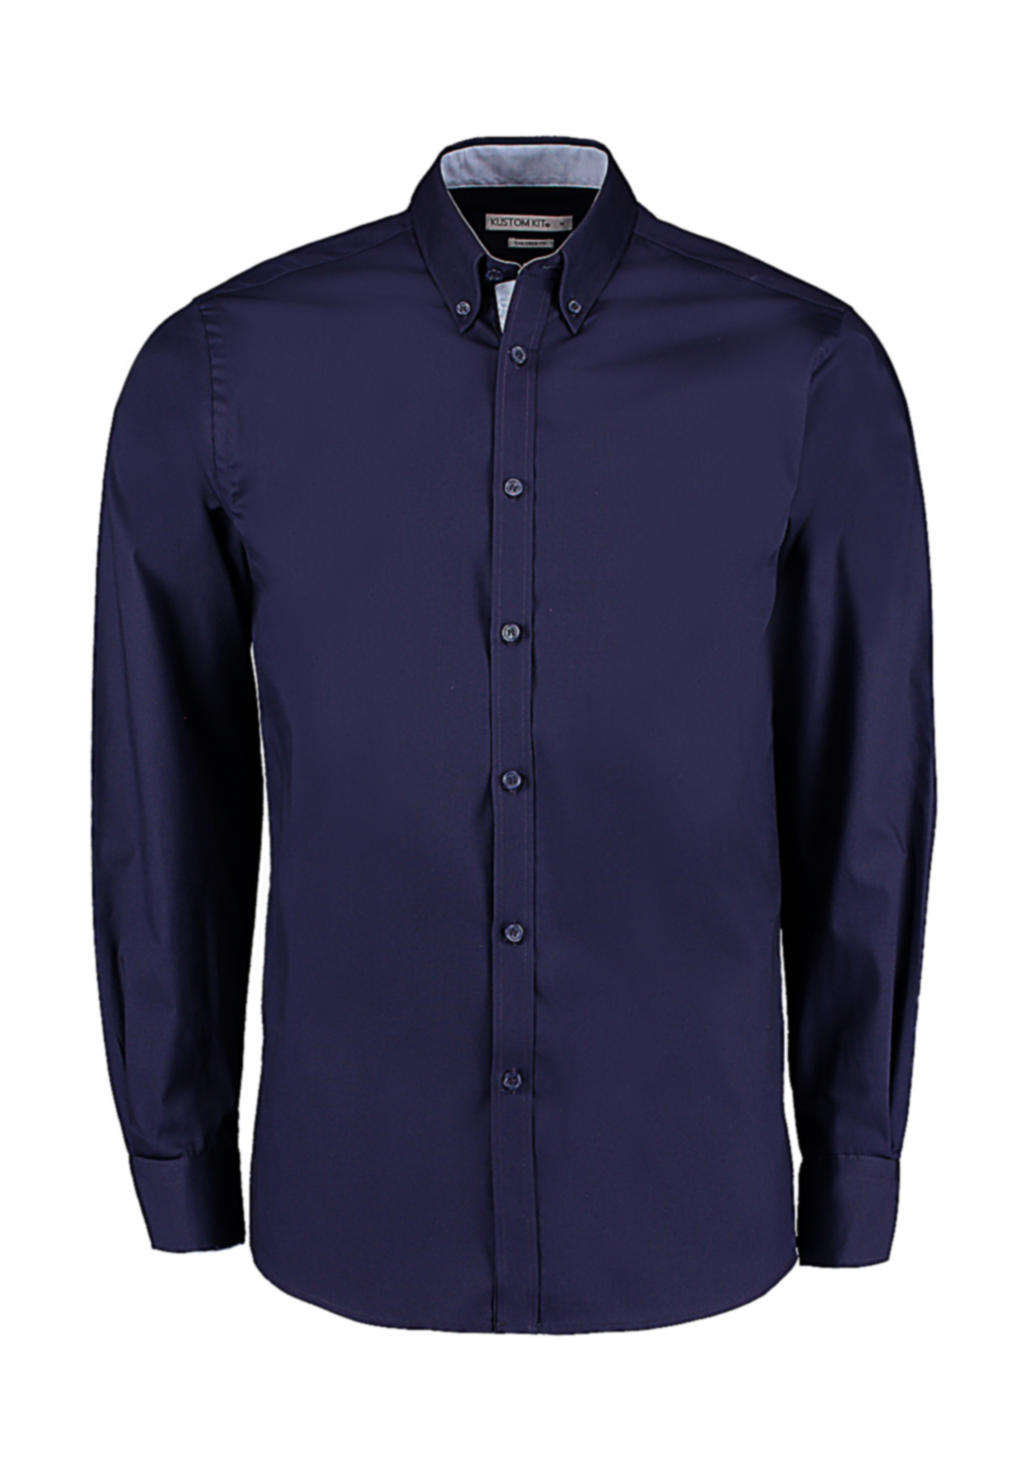  Tailored Fit Premium Contrast Oxford Shirt in Farbe Navy/Light Blue